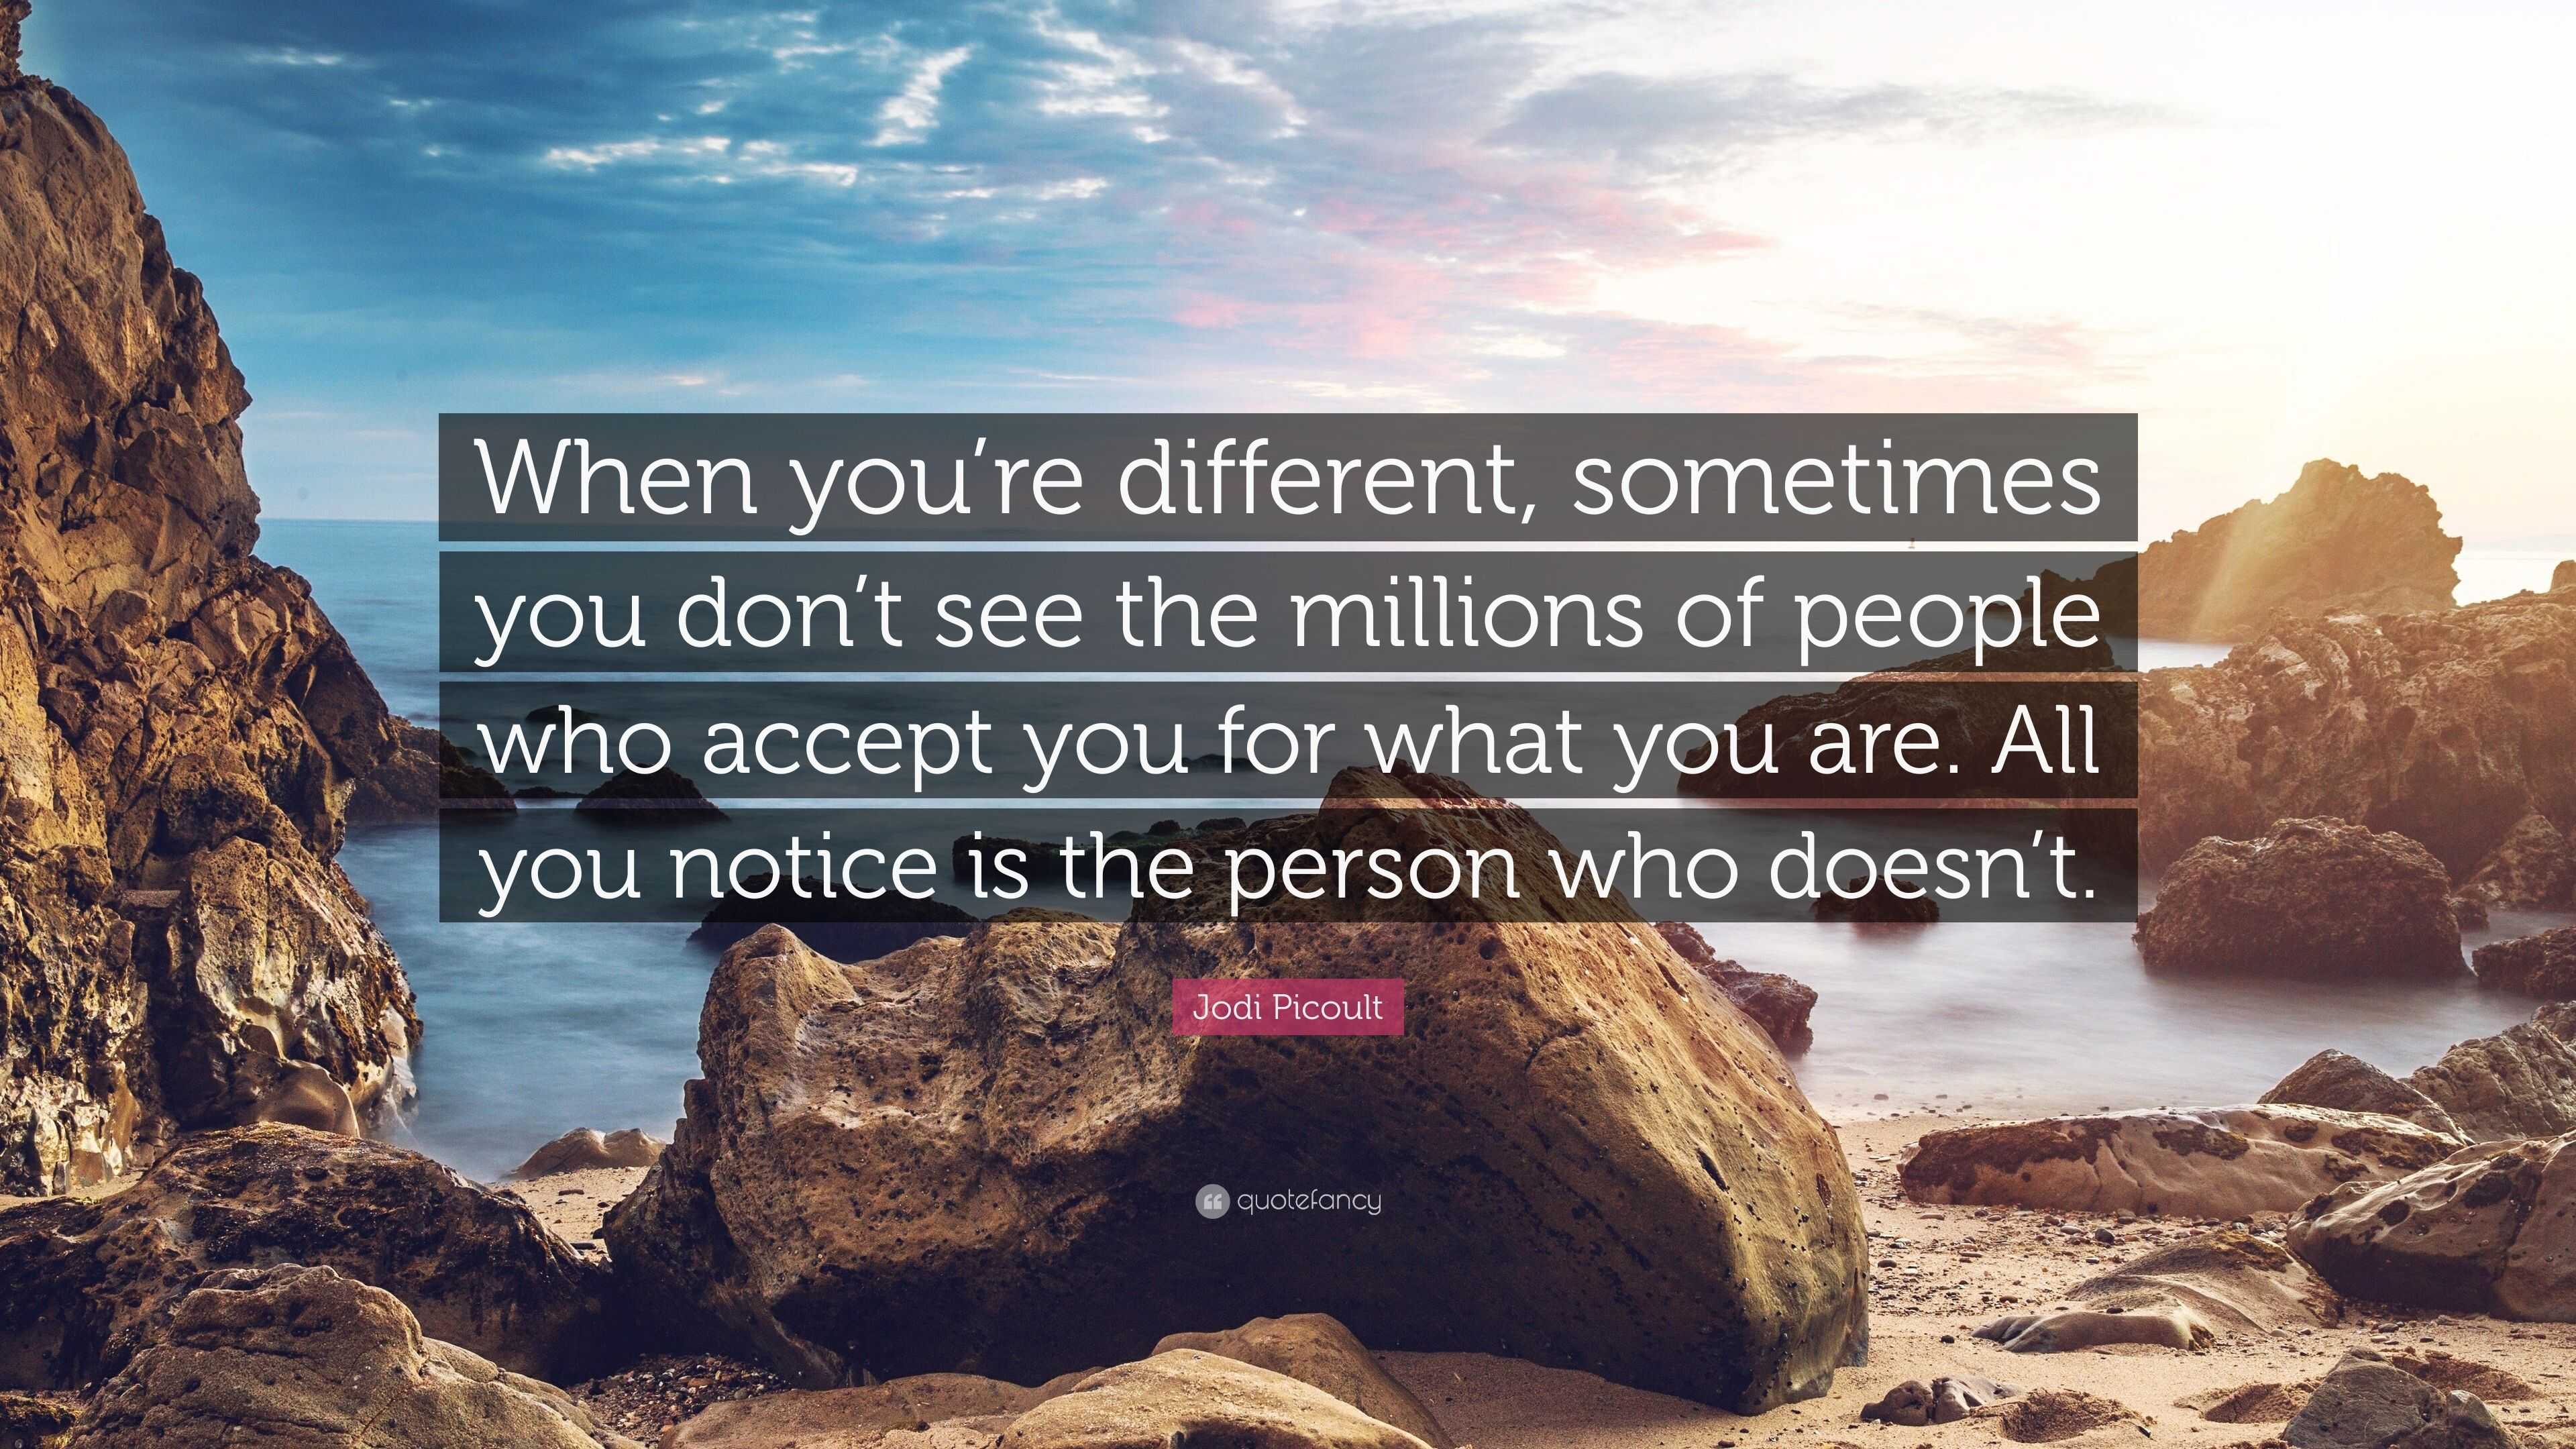 Jodi Picoult Quote: “When you’re different, sometimes you don’t see the ...